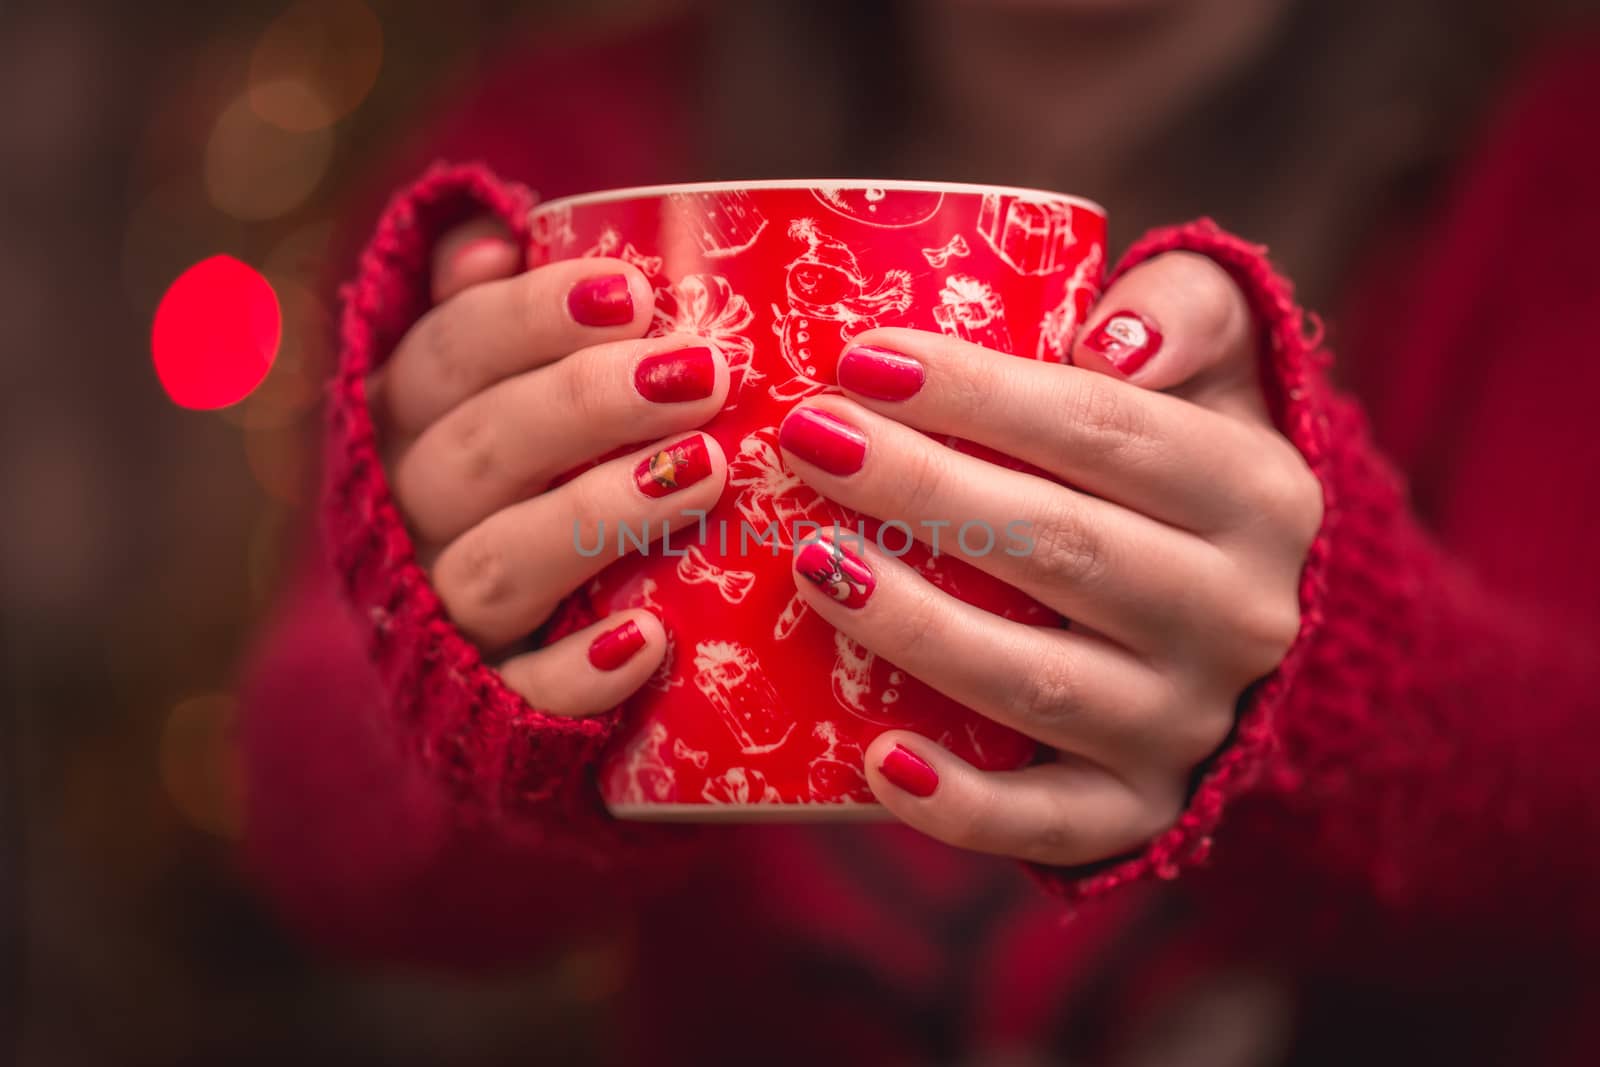 Woman's hand holding a red cup of coffee. With a beautiful winter manicure. Drink, fashion, morning